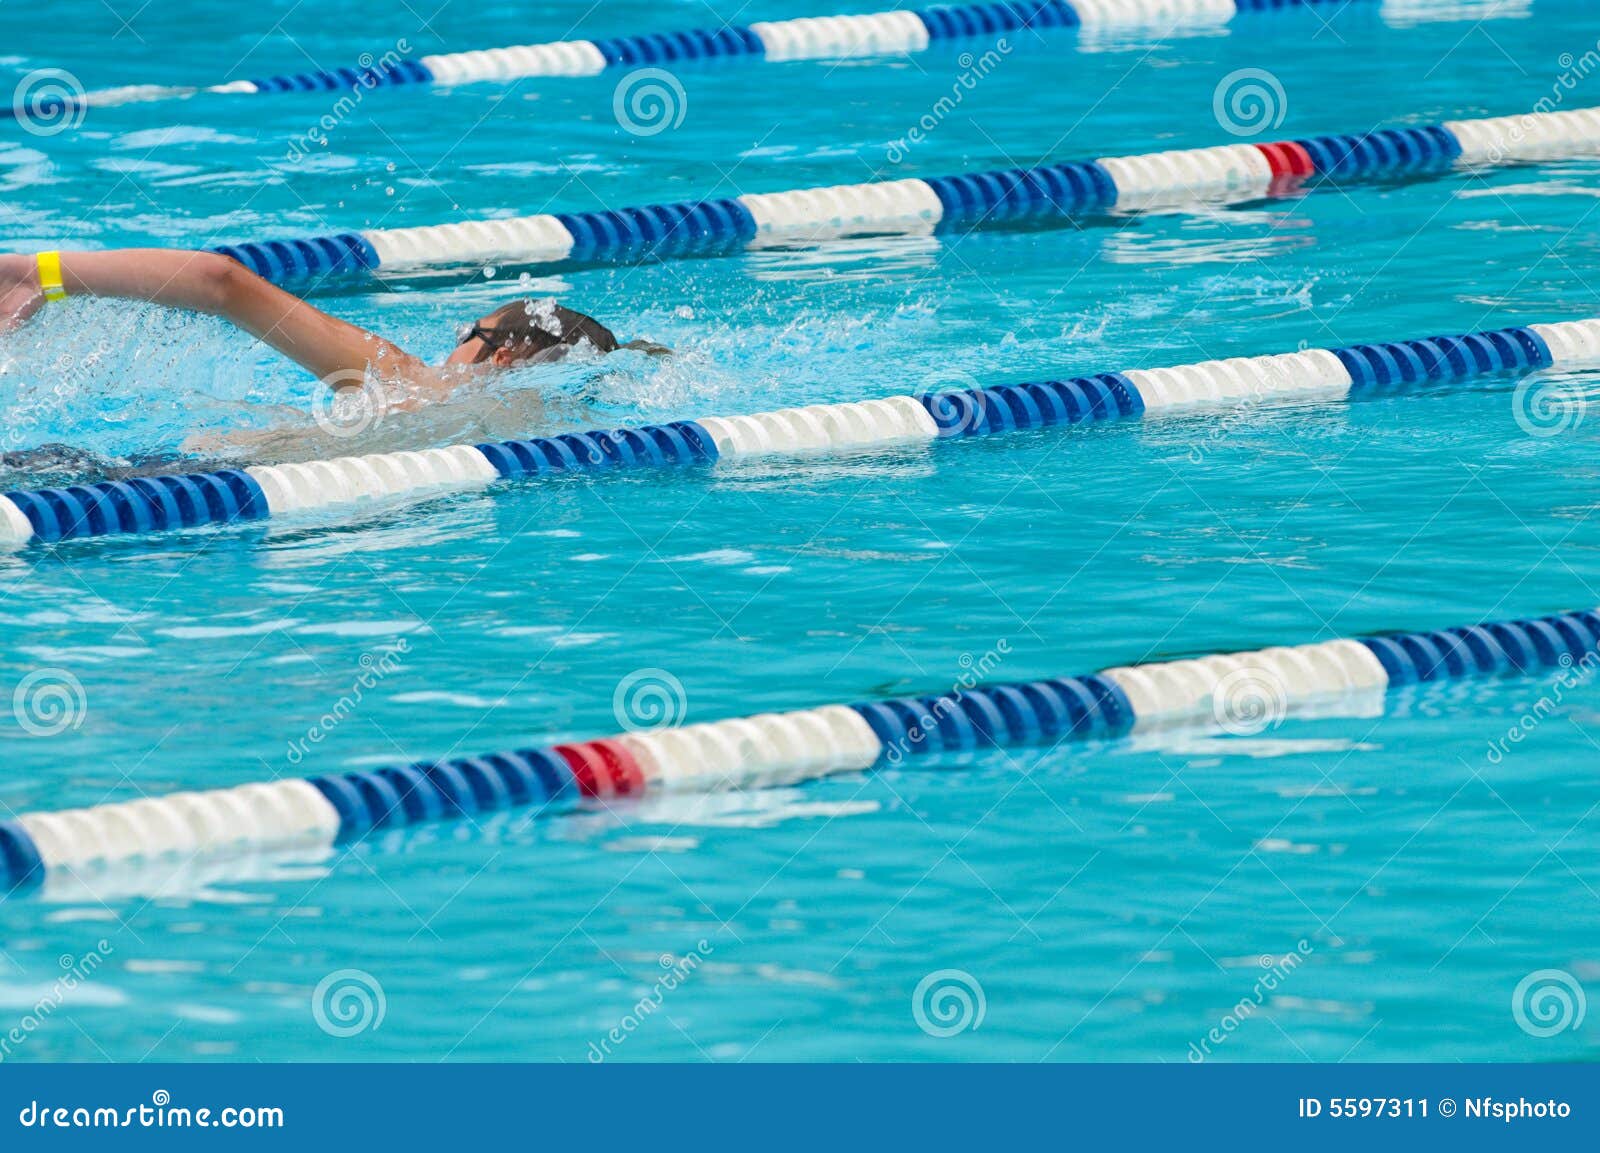 non-identifiable swimmer in outdoor swimming pool